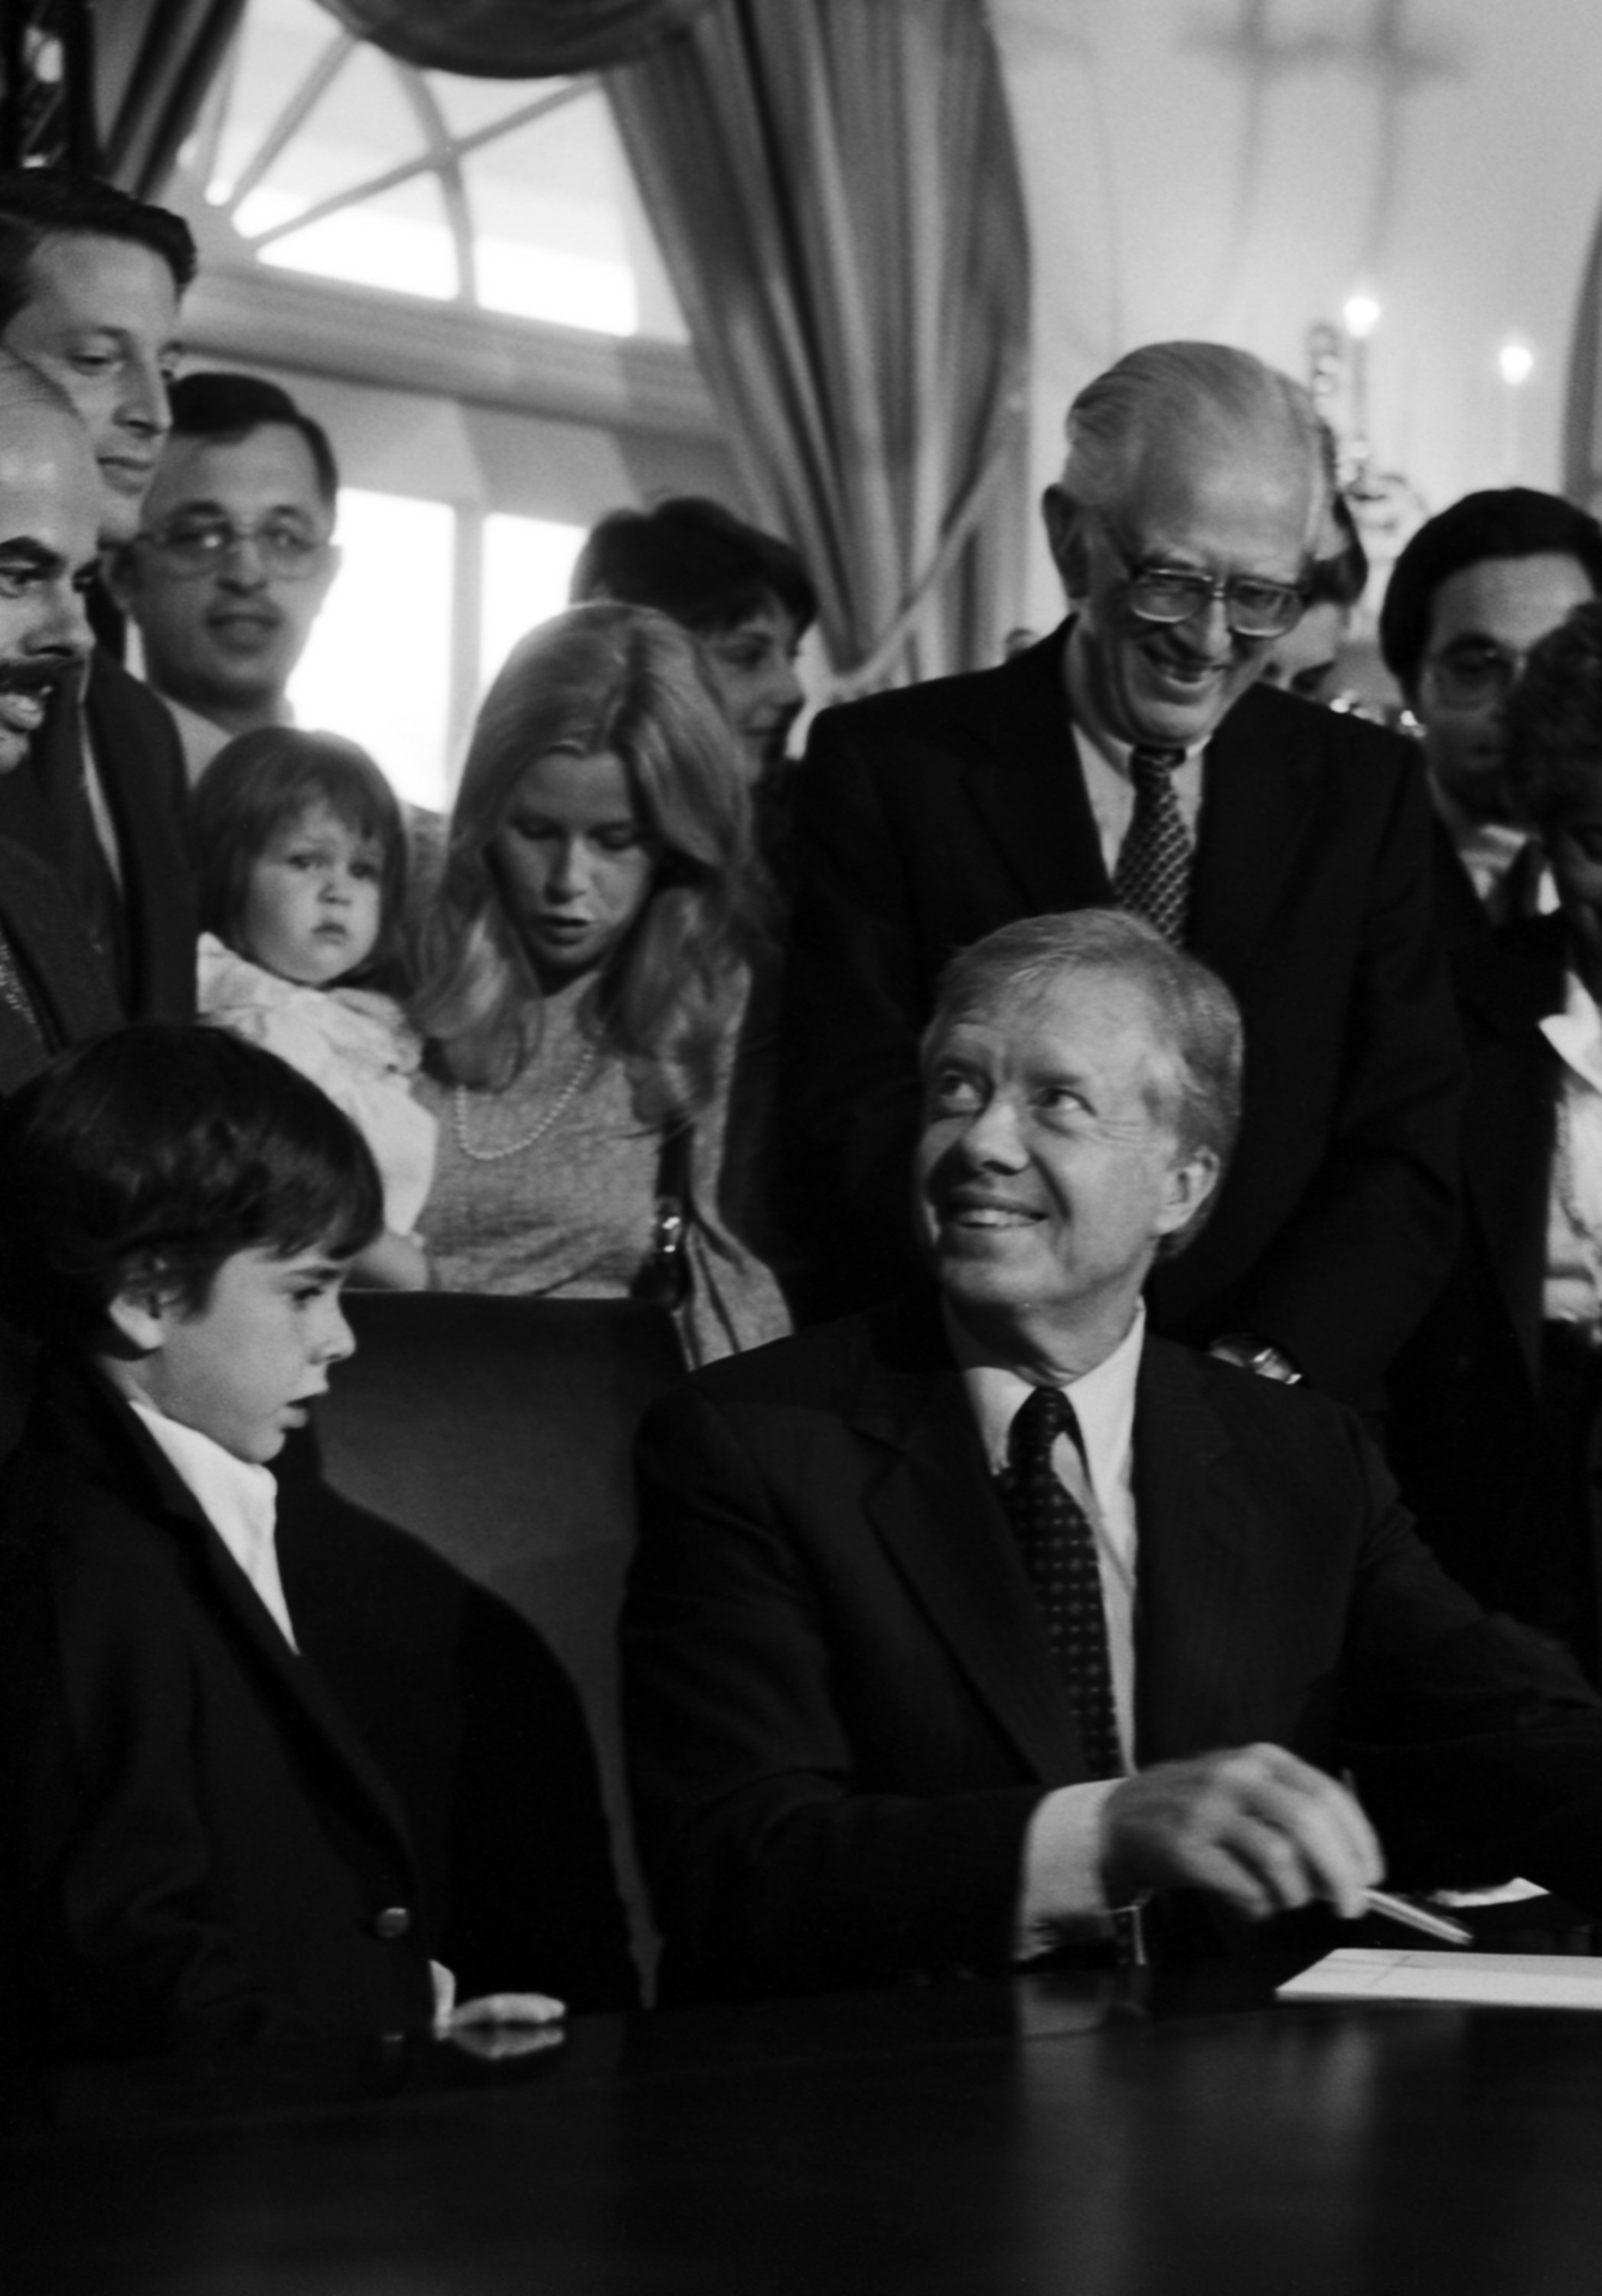 President Carter with a group of people